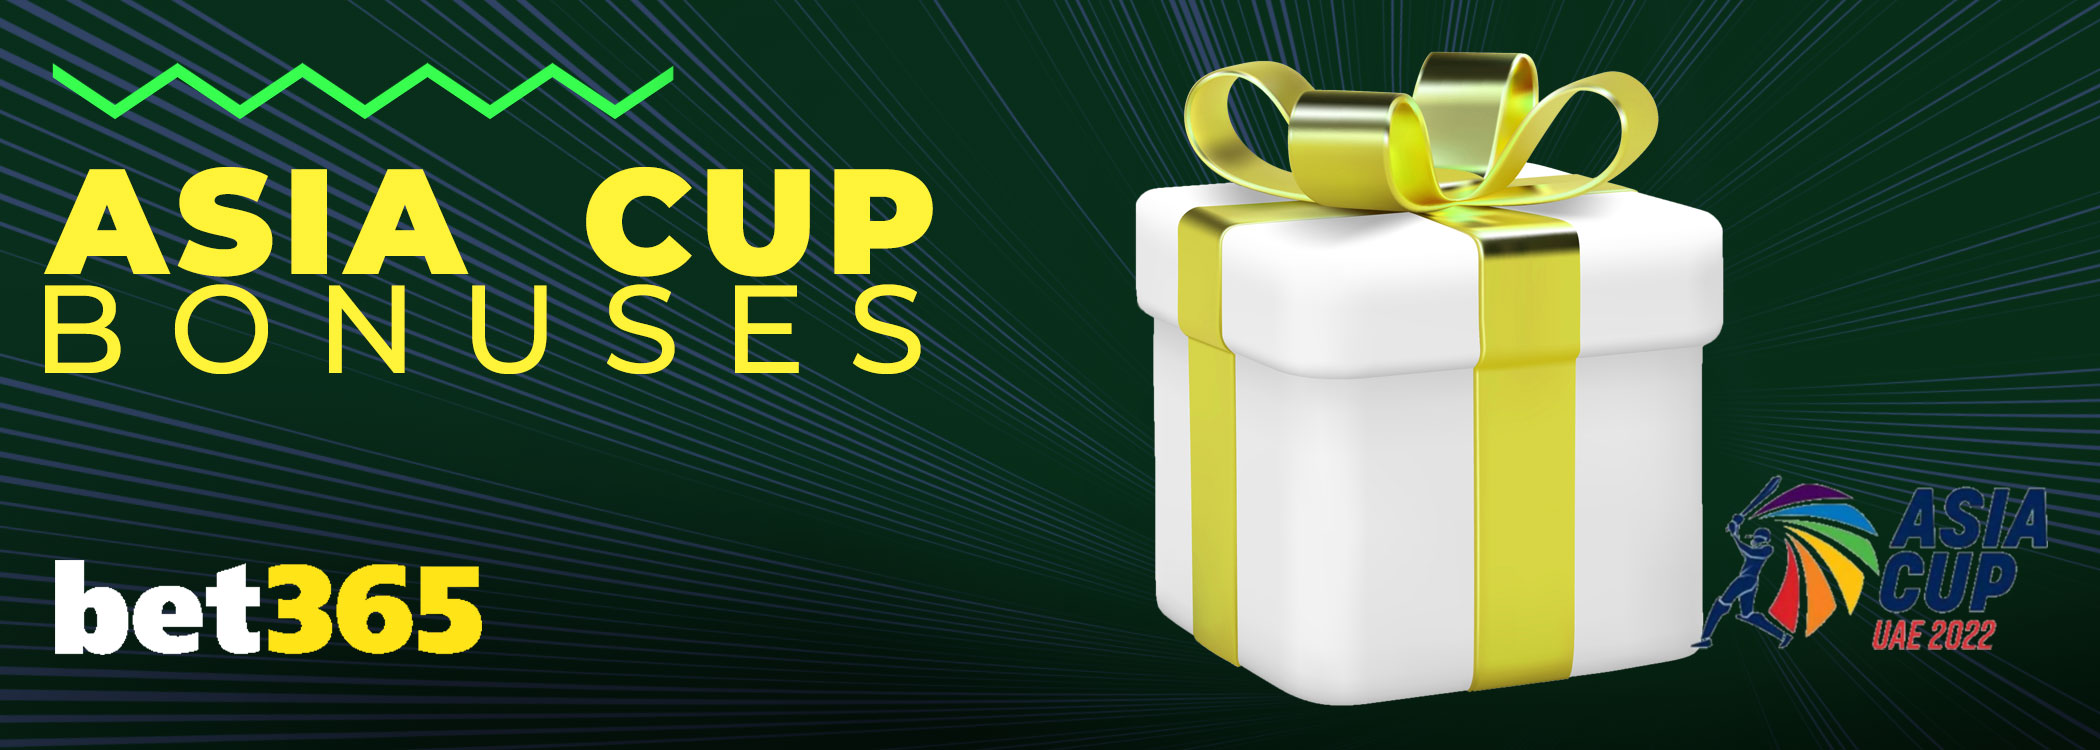 Bonuses on the asia cup in the bet365.